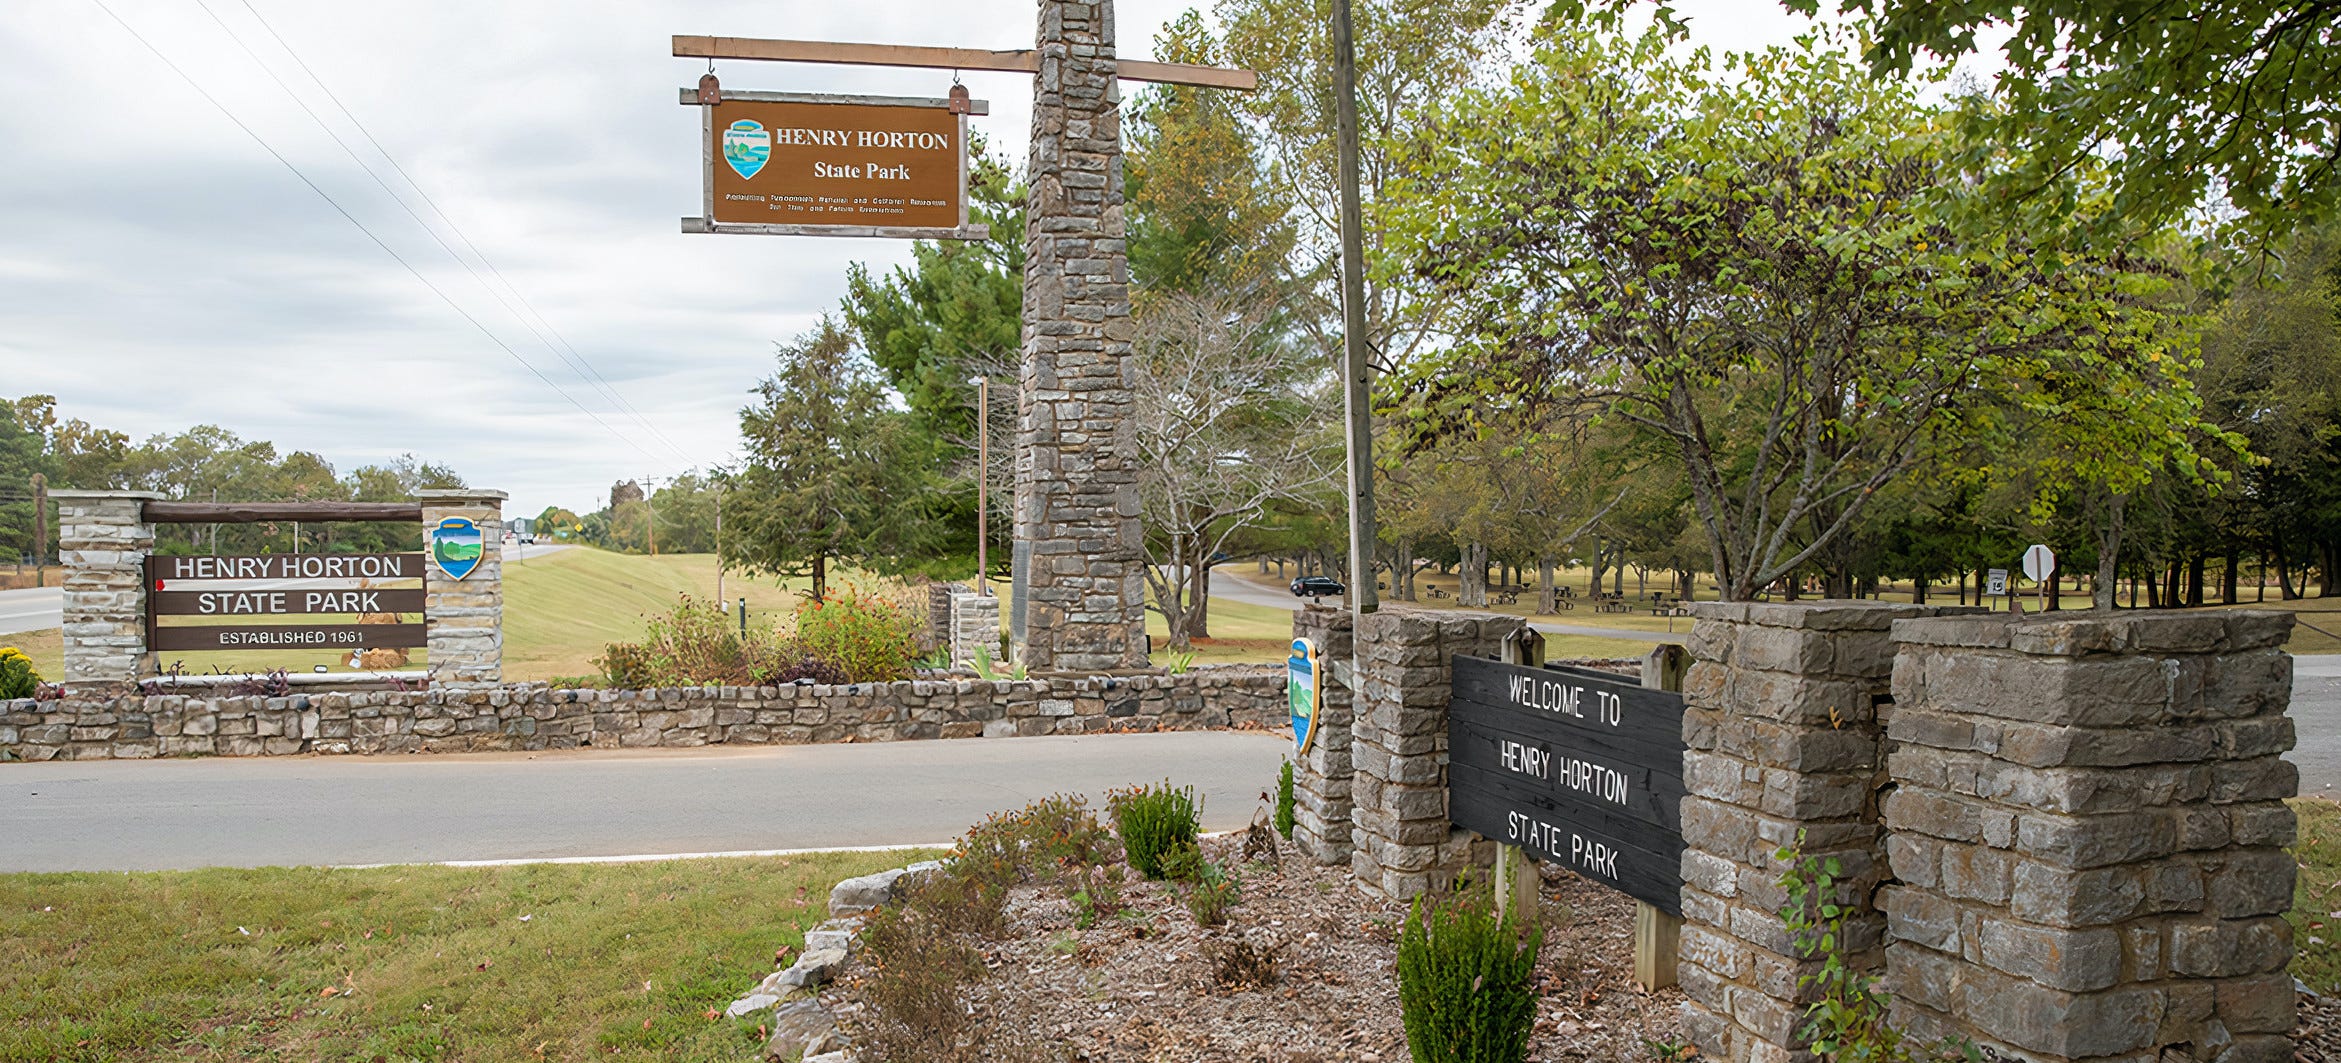 Entrance to the Henry Horton State Park, site of GameTIme's Healthy Place project with BlueCross BlueShield Foundation of Tennessee